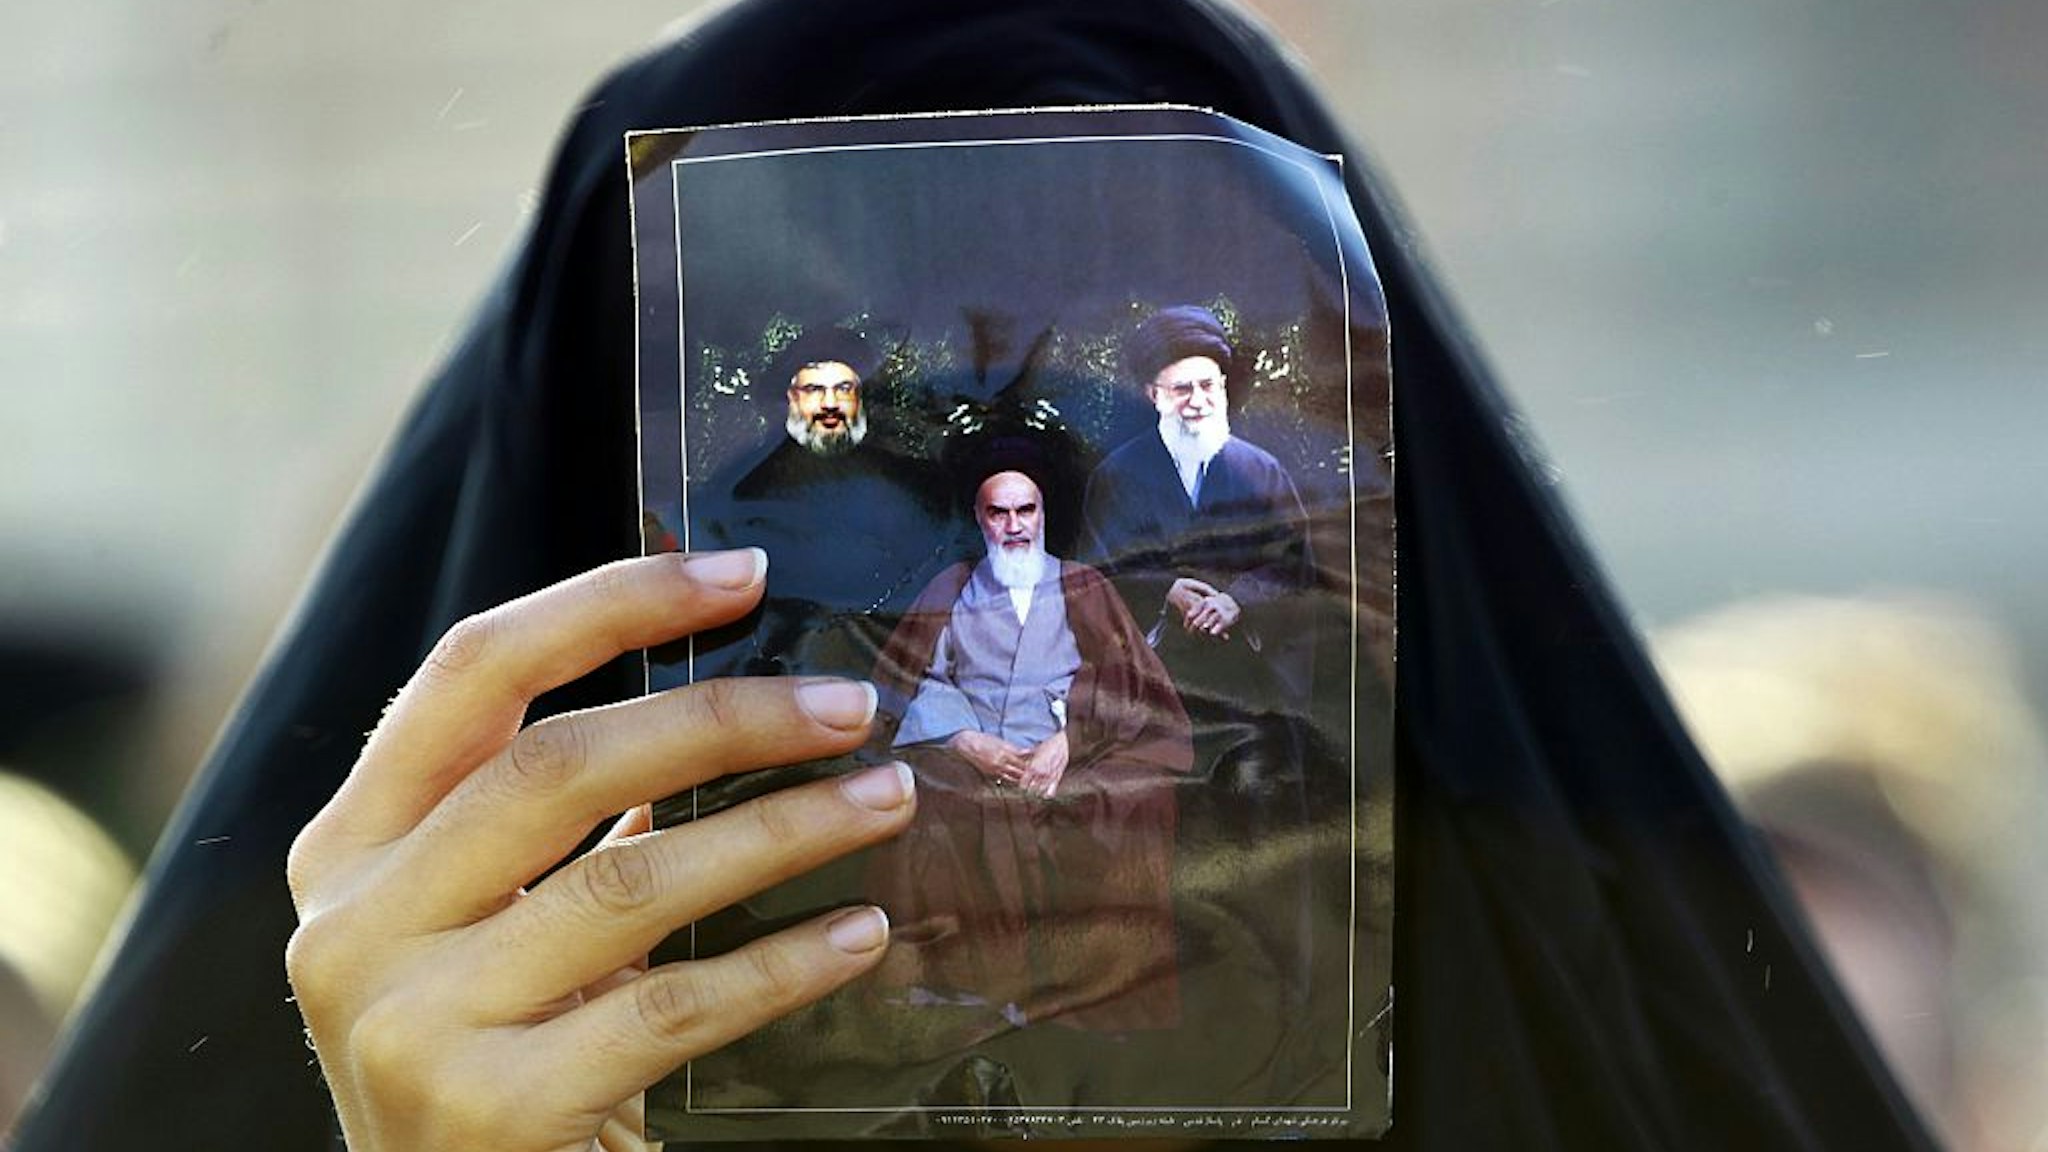 A Shiite Muslim pilgrim holds up a picture of Iranian supreme leader Ayatollah Ali Khamenei (R), Iran's late founder of the Islamic Republic Ayatollah Ruhollah Khomeini (C), and the head of Lebanon's militant Shiite Muslim movement Hezbollah, Hassan Nasrallah, during a break in Najaf on their way to the shrine central city of Karbala on December 9, 2014 where they take part in the Arbaeen religious festival which marks the 40th day after Ashura which commemorates the seventh century killing of Prophet Mohammed's grandson, Imam Hussein. In addition to the millions of Shiite devotees who flock to Karbala, some of them on foot, from across Iraq, a large contingent of Iranians traditionally make the trip. AFP PHOTO / HAIDAR HAMDANI (Photo credit should read